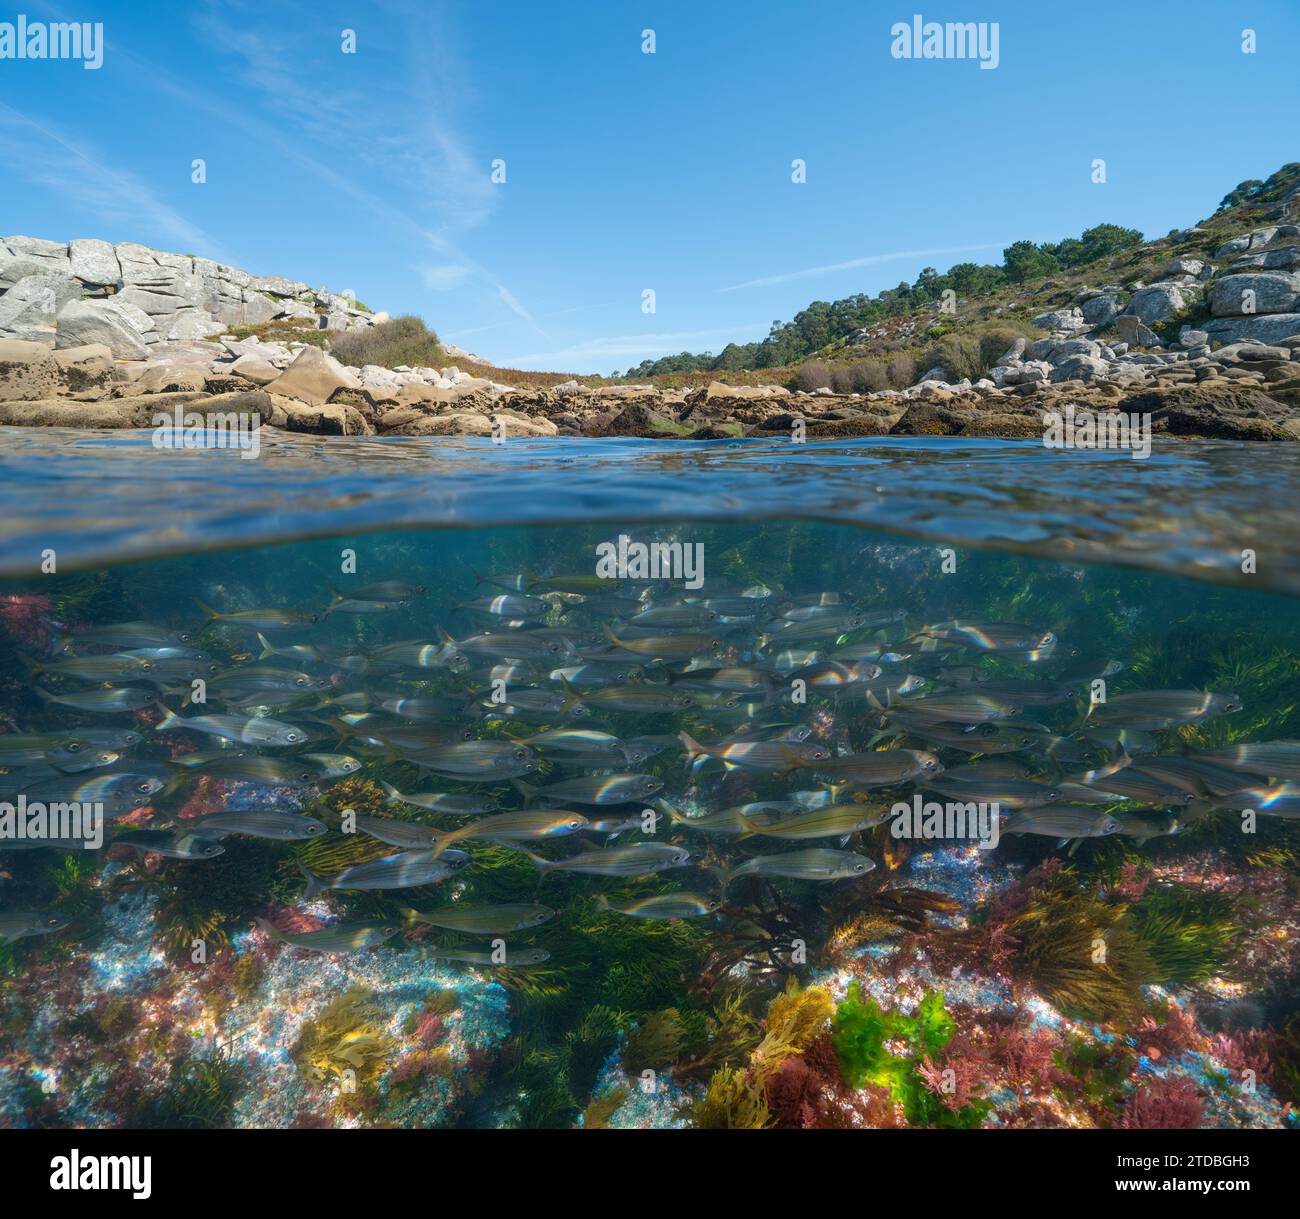 Coastline and a school of fish underwater (bogue), Atlantic ocean, Spain, natural scene, split view half over and under water surface, Galicia Stock Photo